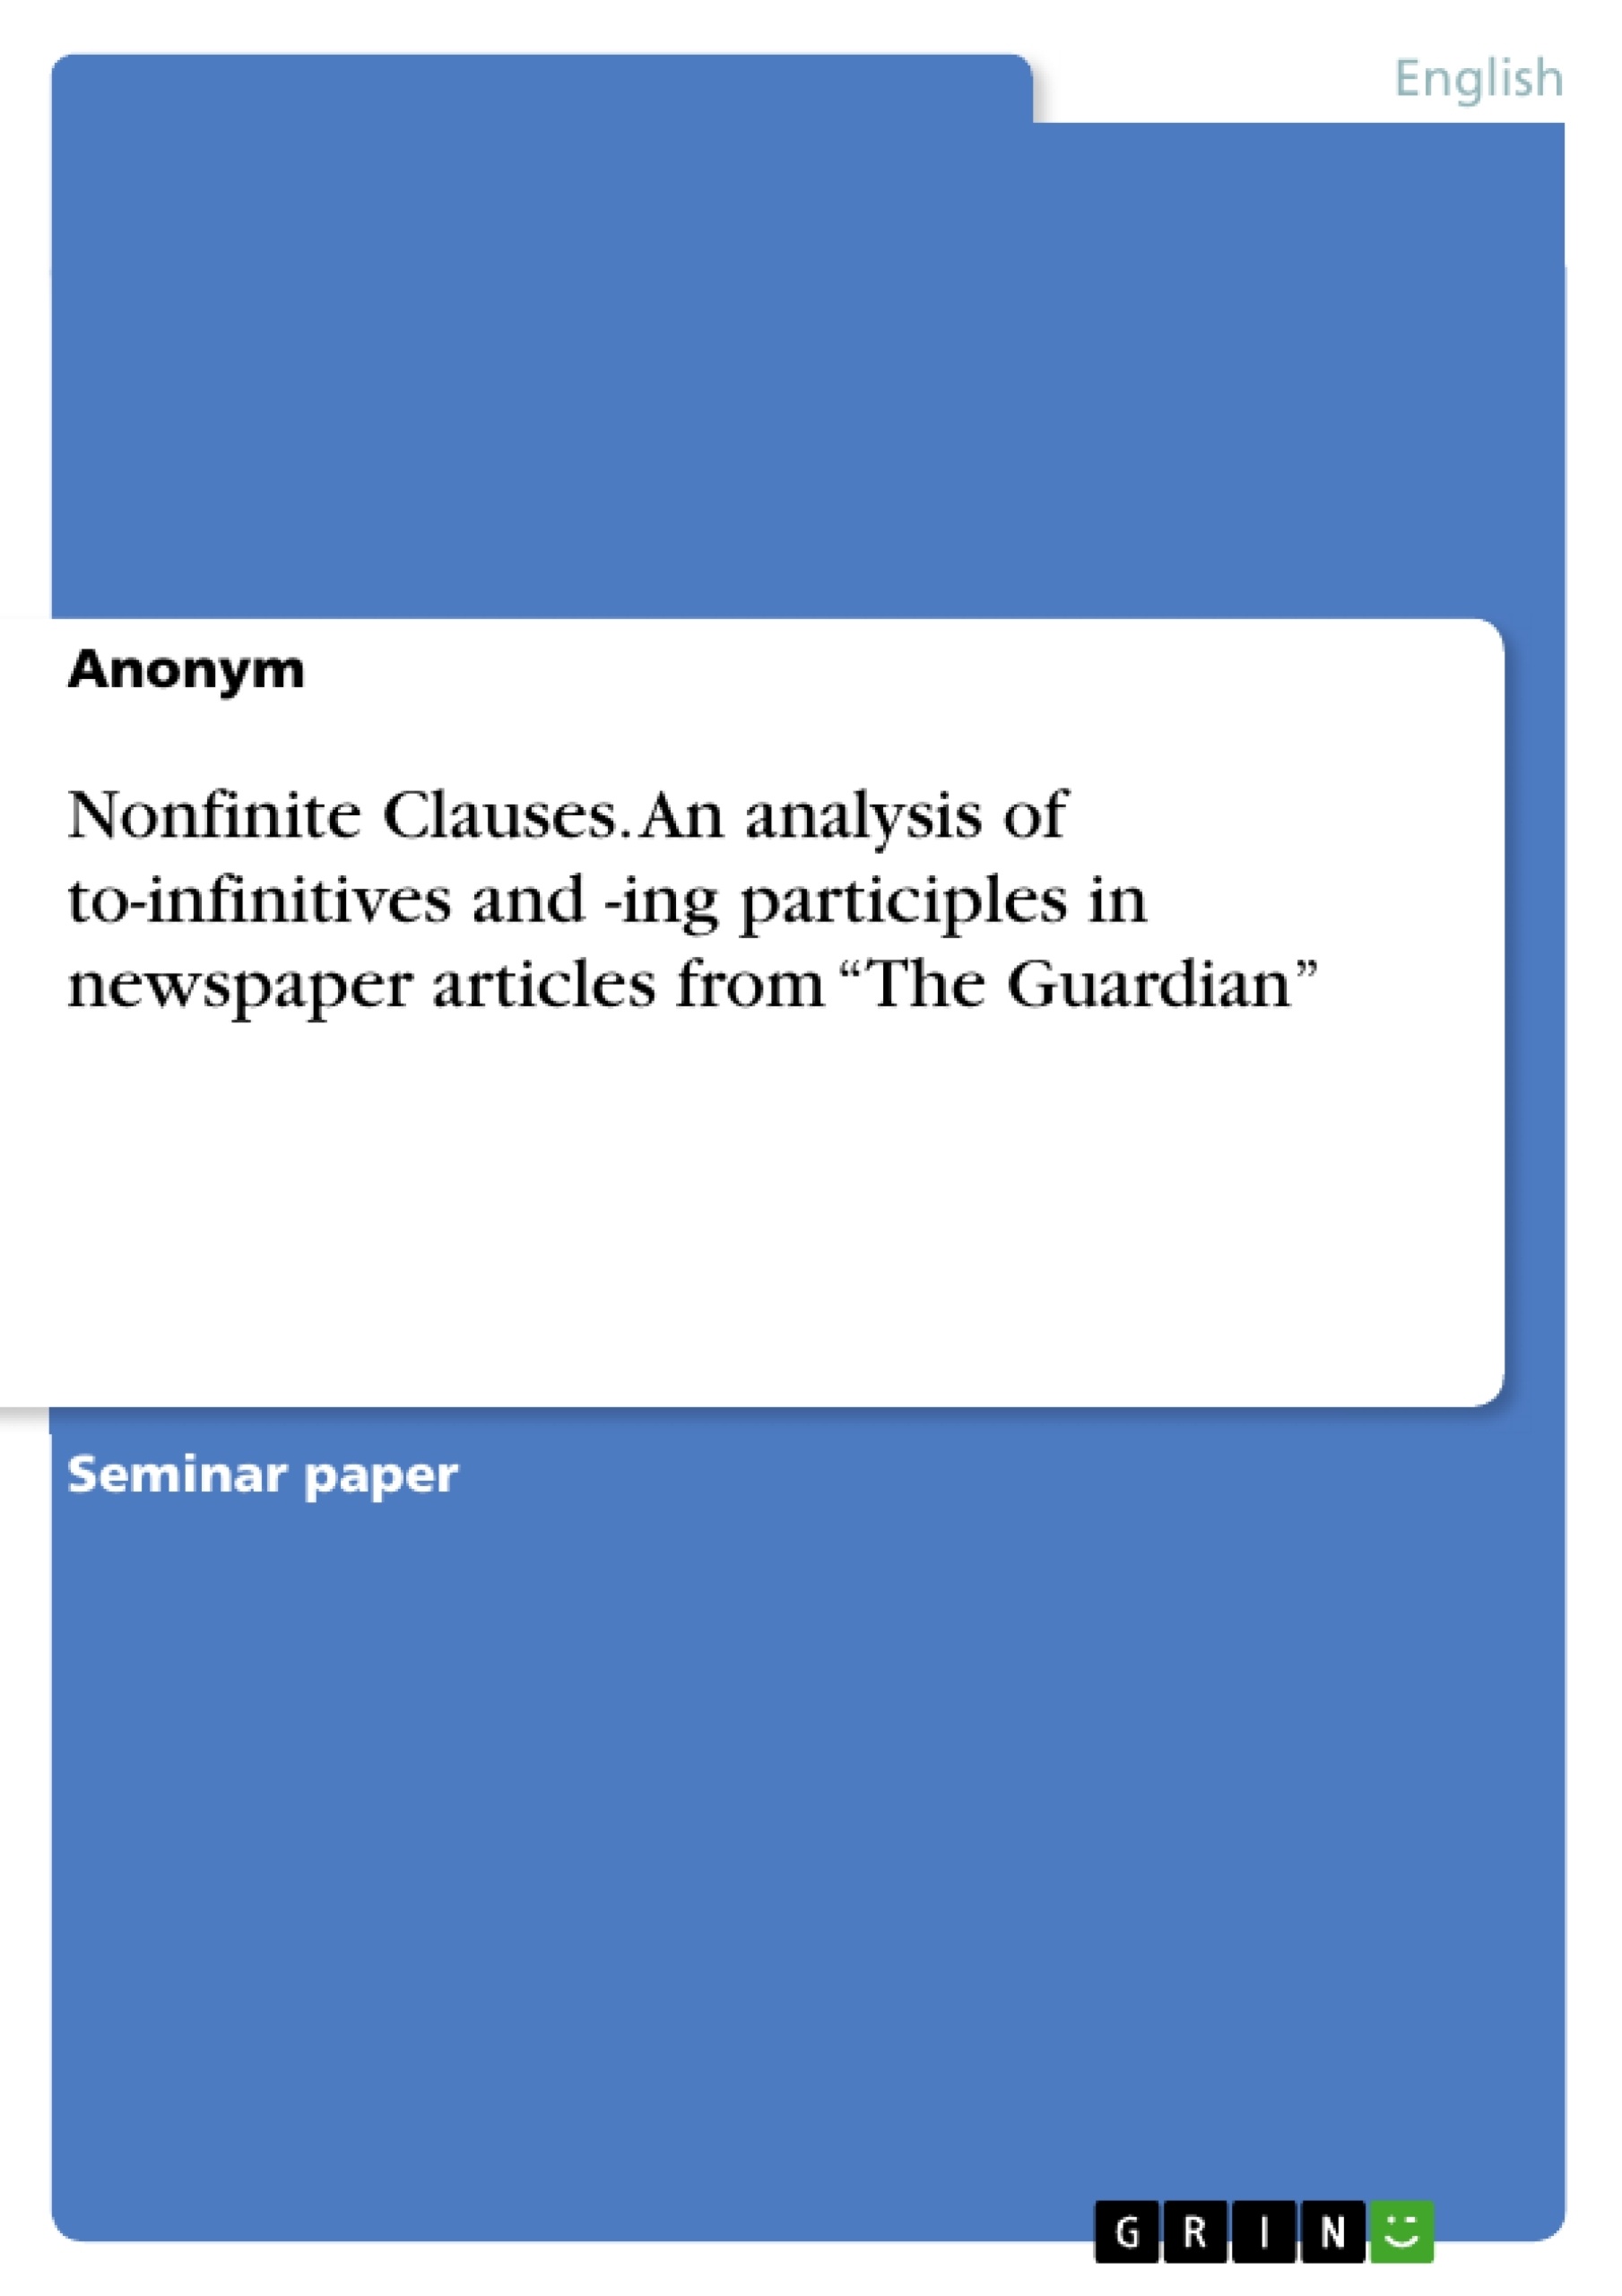 Title: Nonfinite Clauses. An analysis of  to-infinitives and -ing participles in newspaper articles from “The Guardian”